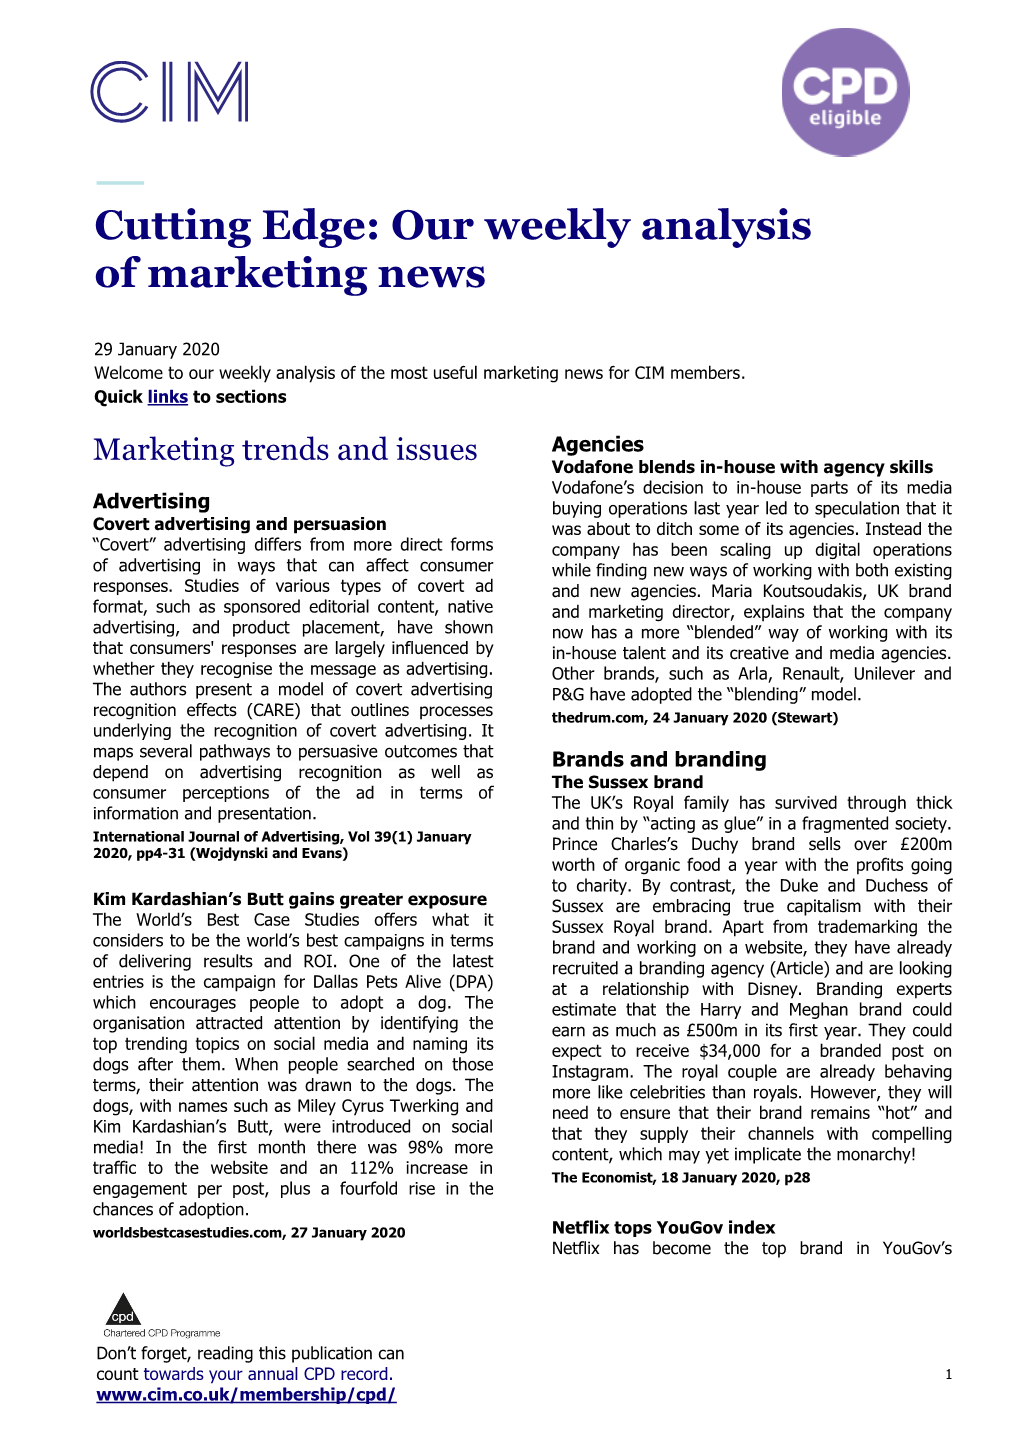 Cutting Edge: Our Weekly Analysis of Marketing News